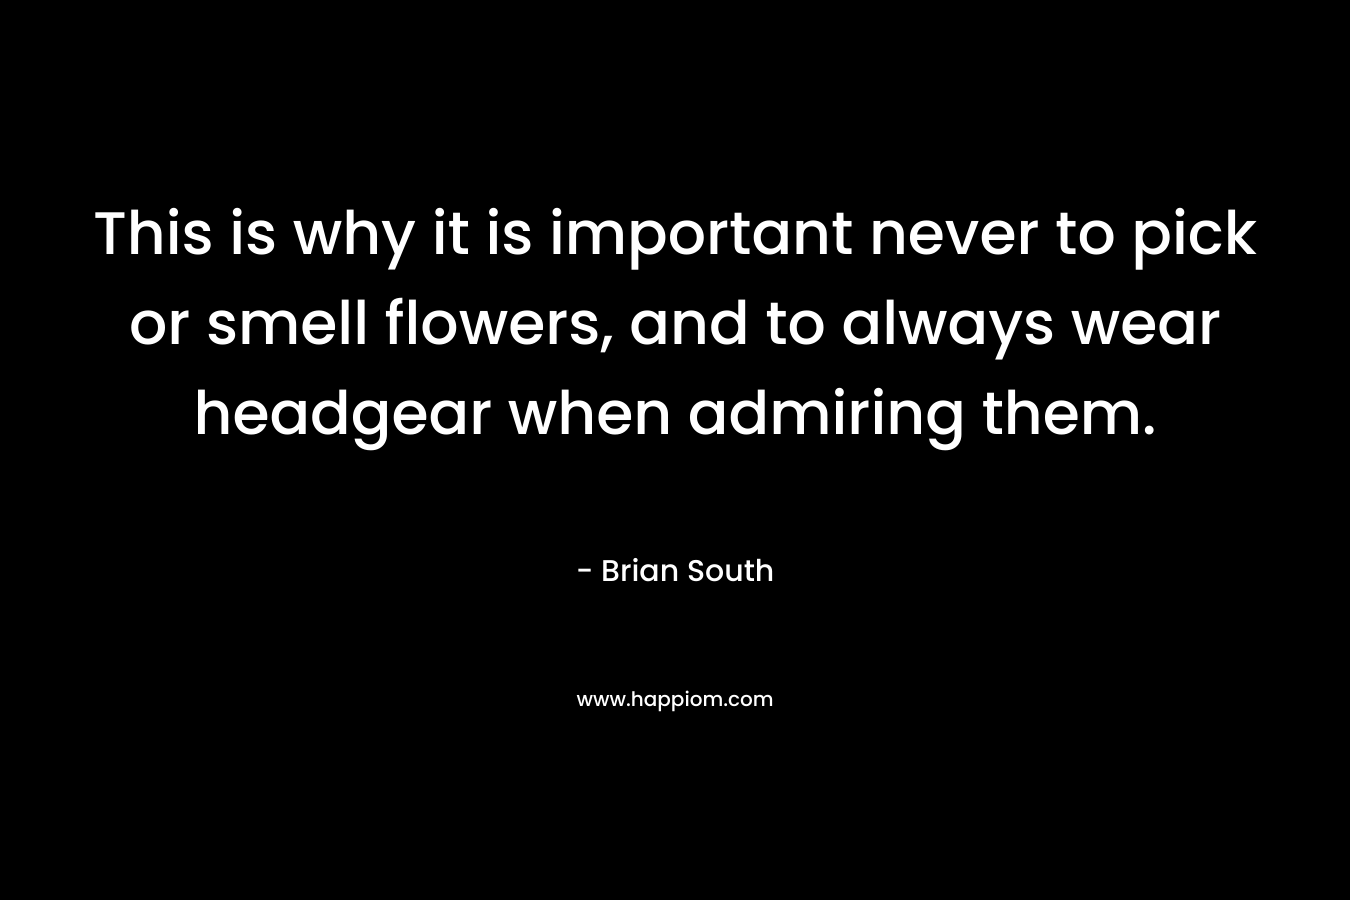 This is why it is important never to pick or smell flowers, and to always wear headgear when admiring them. – Brian South